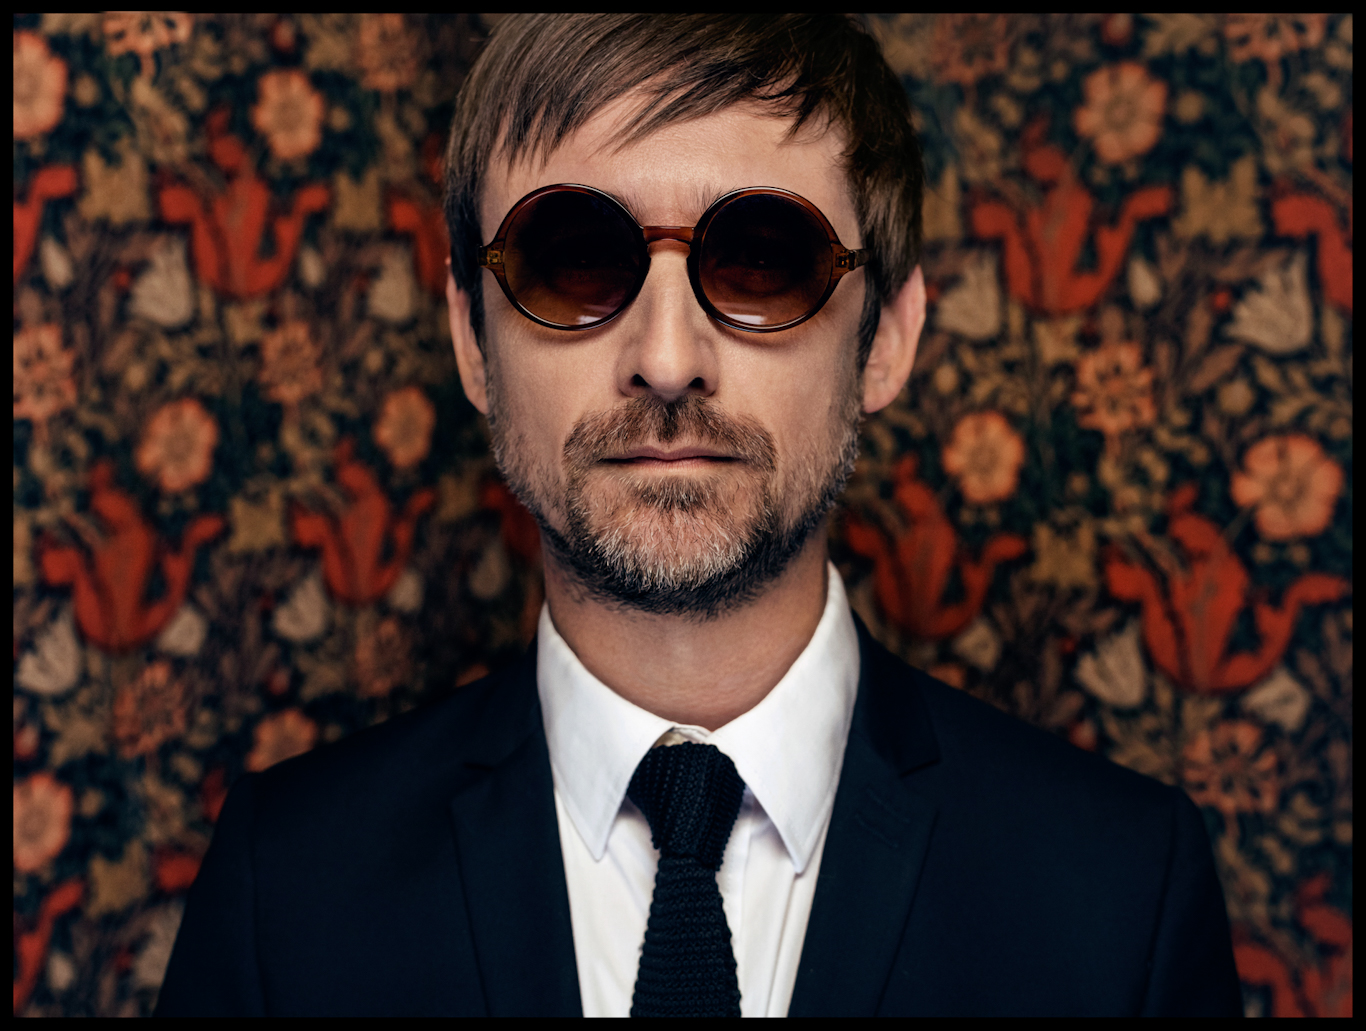 LIVE REVIEW: The Divine Comedy @ The London Palladium 